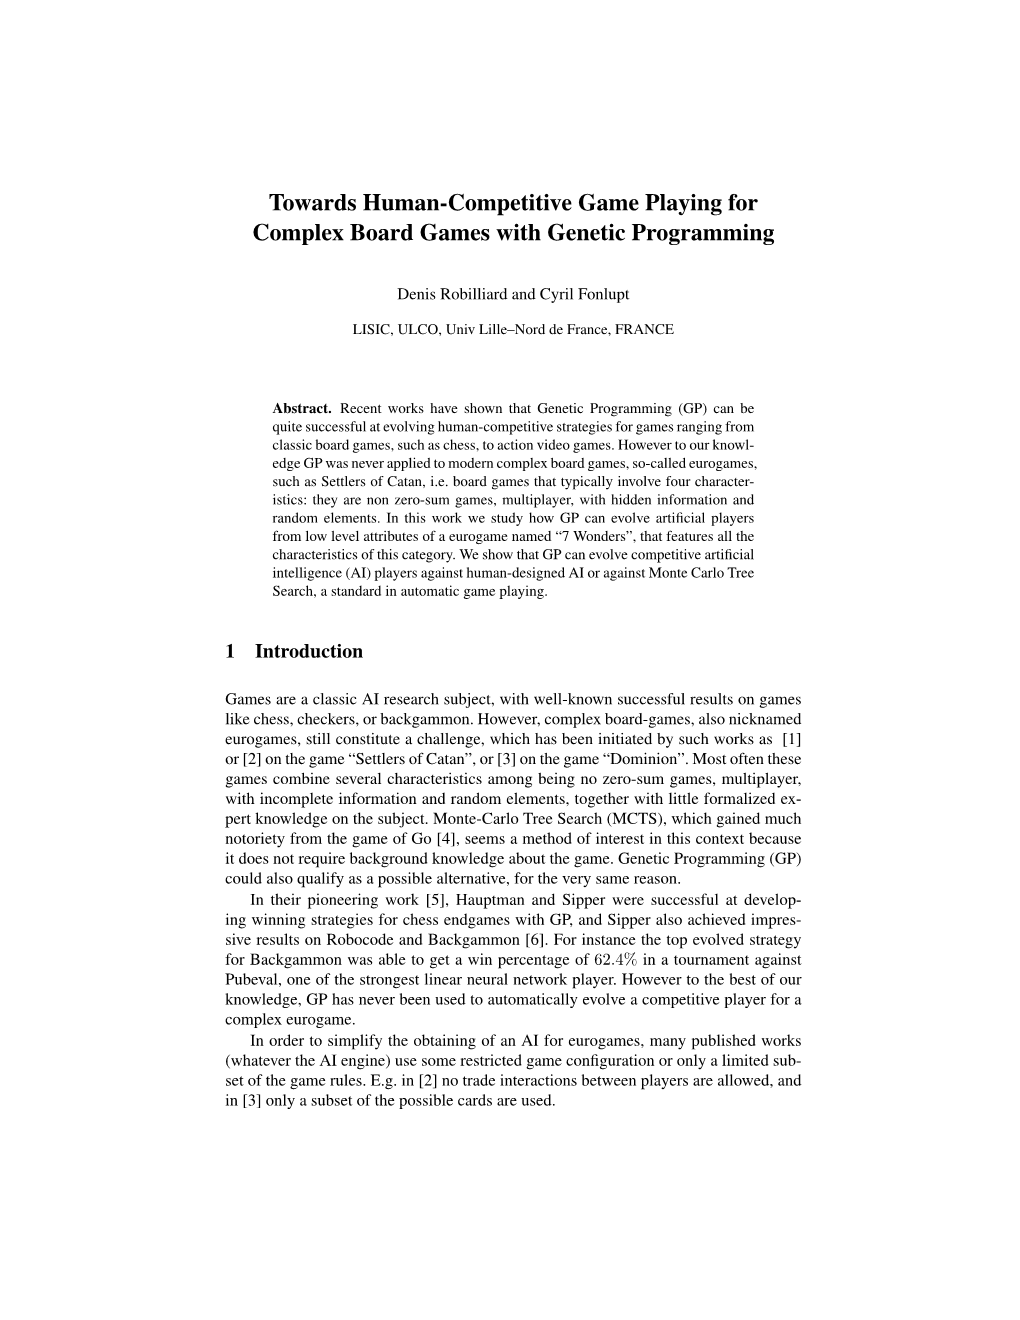 Towards Human-Competitive Game Playing for Complex Board Games with Genetic Programming